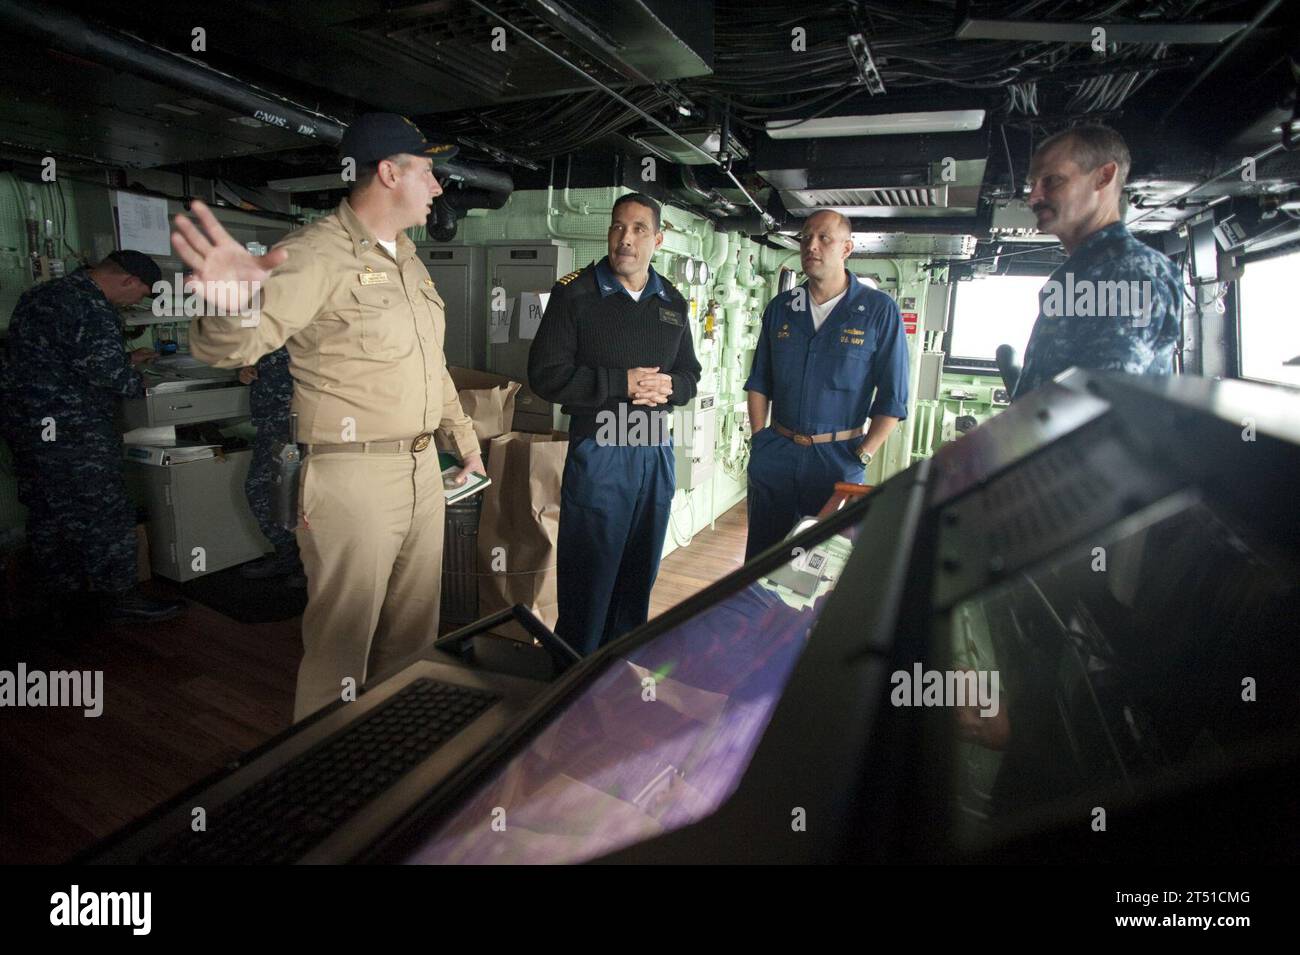 1007015319A-053 PACIFIC OCEAN (July 1, 2010) Cmdr. Jeffrey Oakey, left, commanding officer of the amphibious transport dock ship USS New Orleans (LPD 18), gives a tour of the ship’s bridge to Cmdr. Scott Smith, commanding officer of the guided-missile frigate USS Klakring (FFG 42), and Capt. Brian Nickerson, commodore of Destroyer Squadron (DESRON) 40, during Southern Partnership Station 2010. New Orleans is participating in Southern Partnership Station, an annual deployment of U.S. military training teams to the U.S. Southern Command area of responsibility. Navy Stock Photo